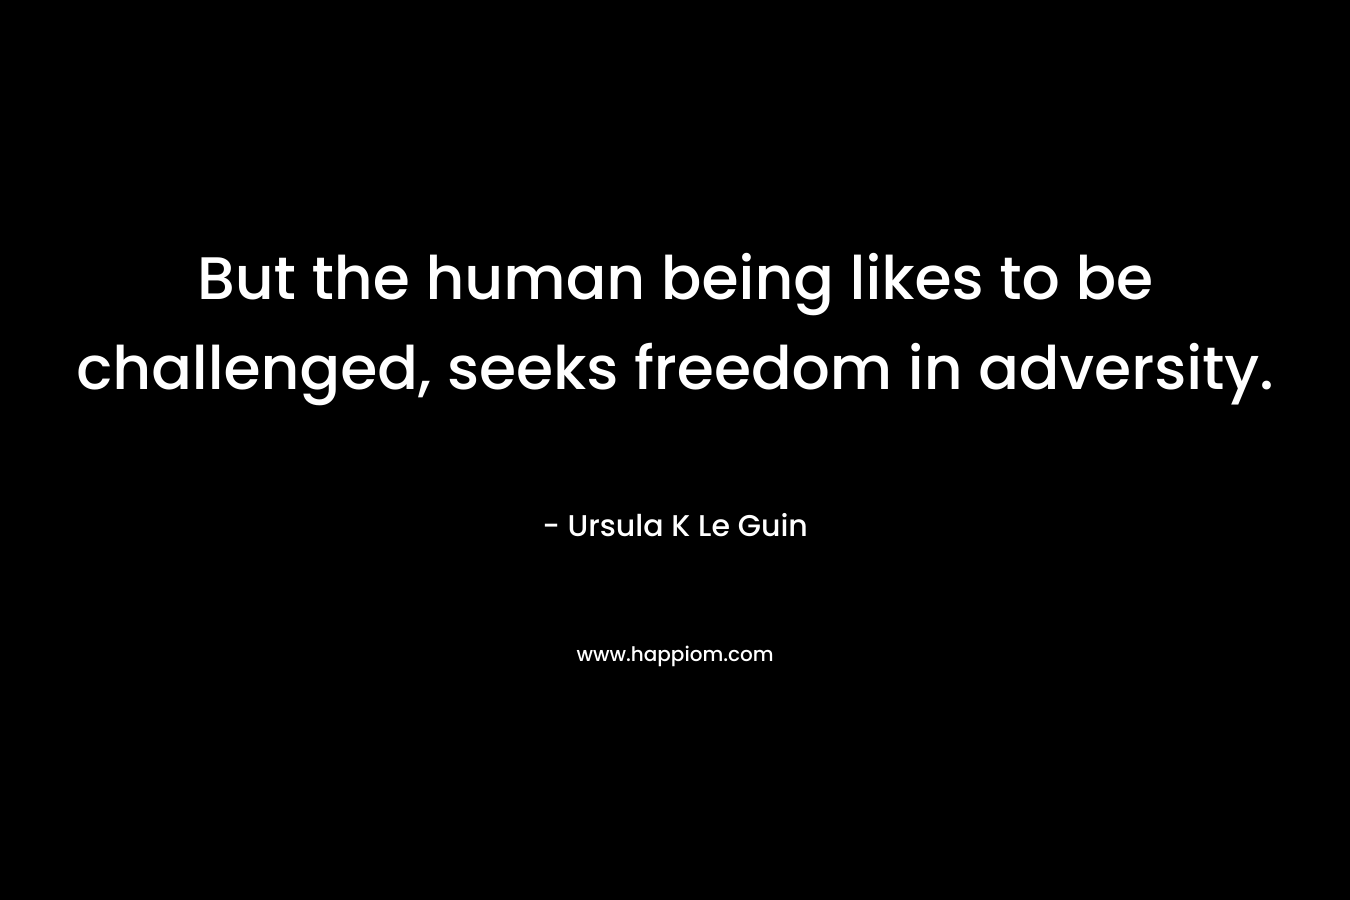 But the human being likes to be challenged, seeks freedom in adversity.